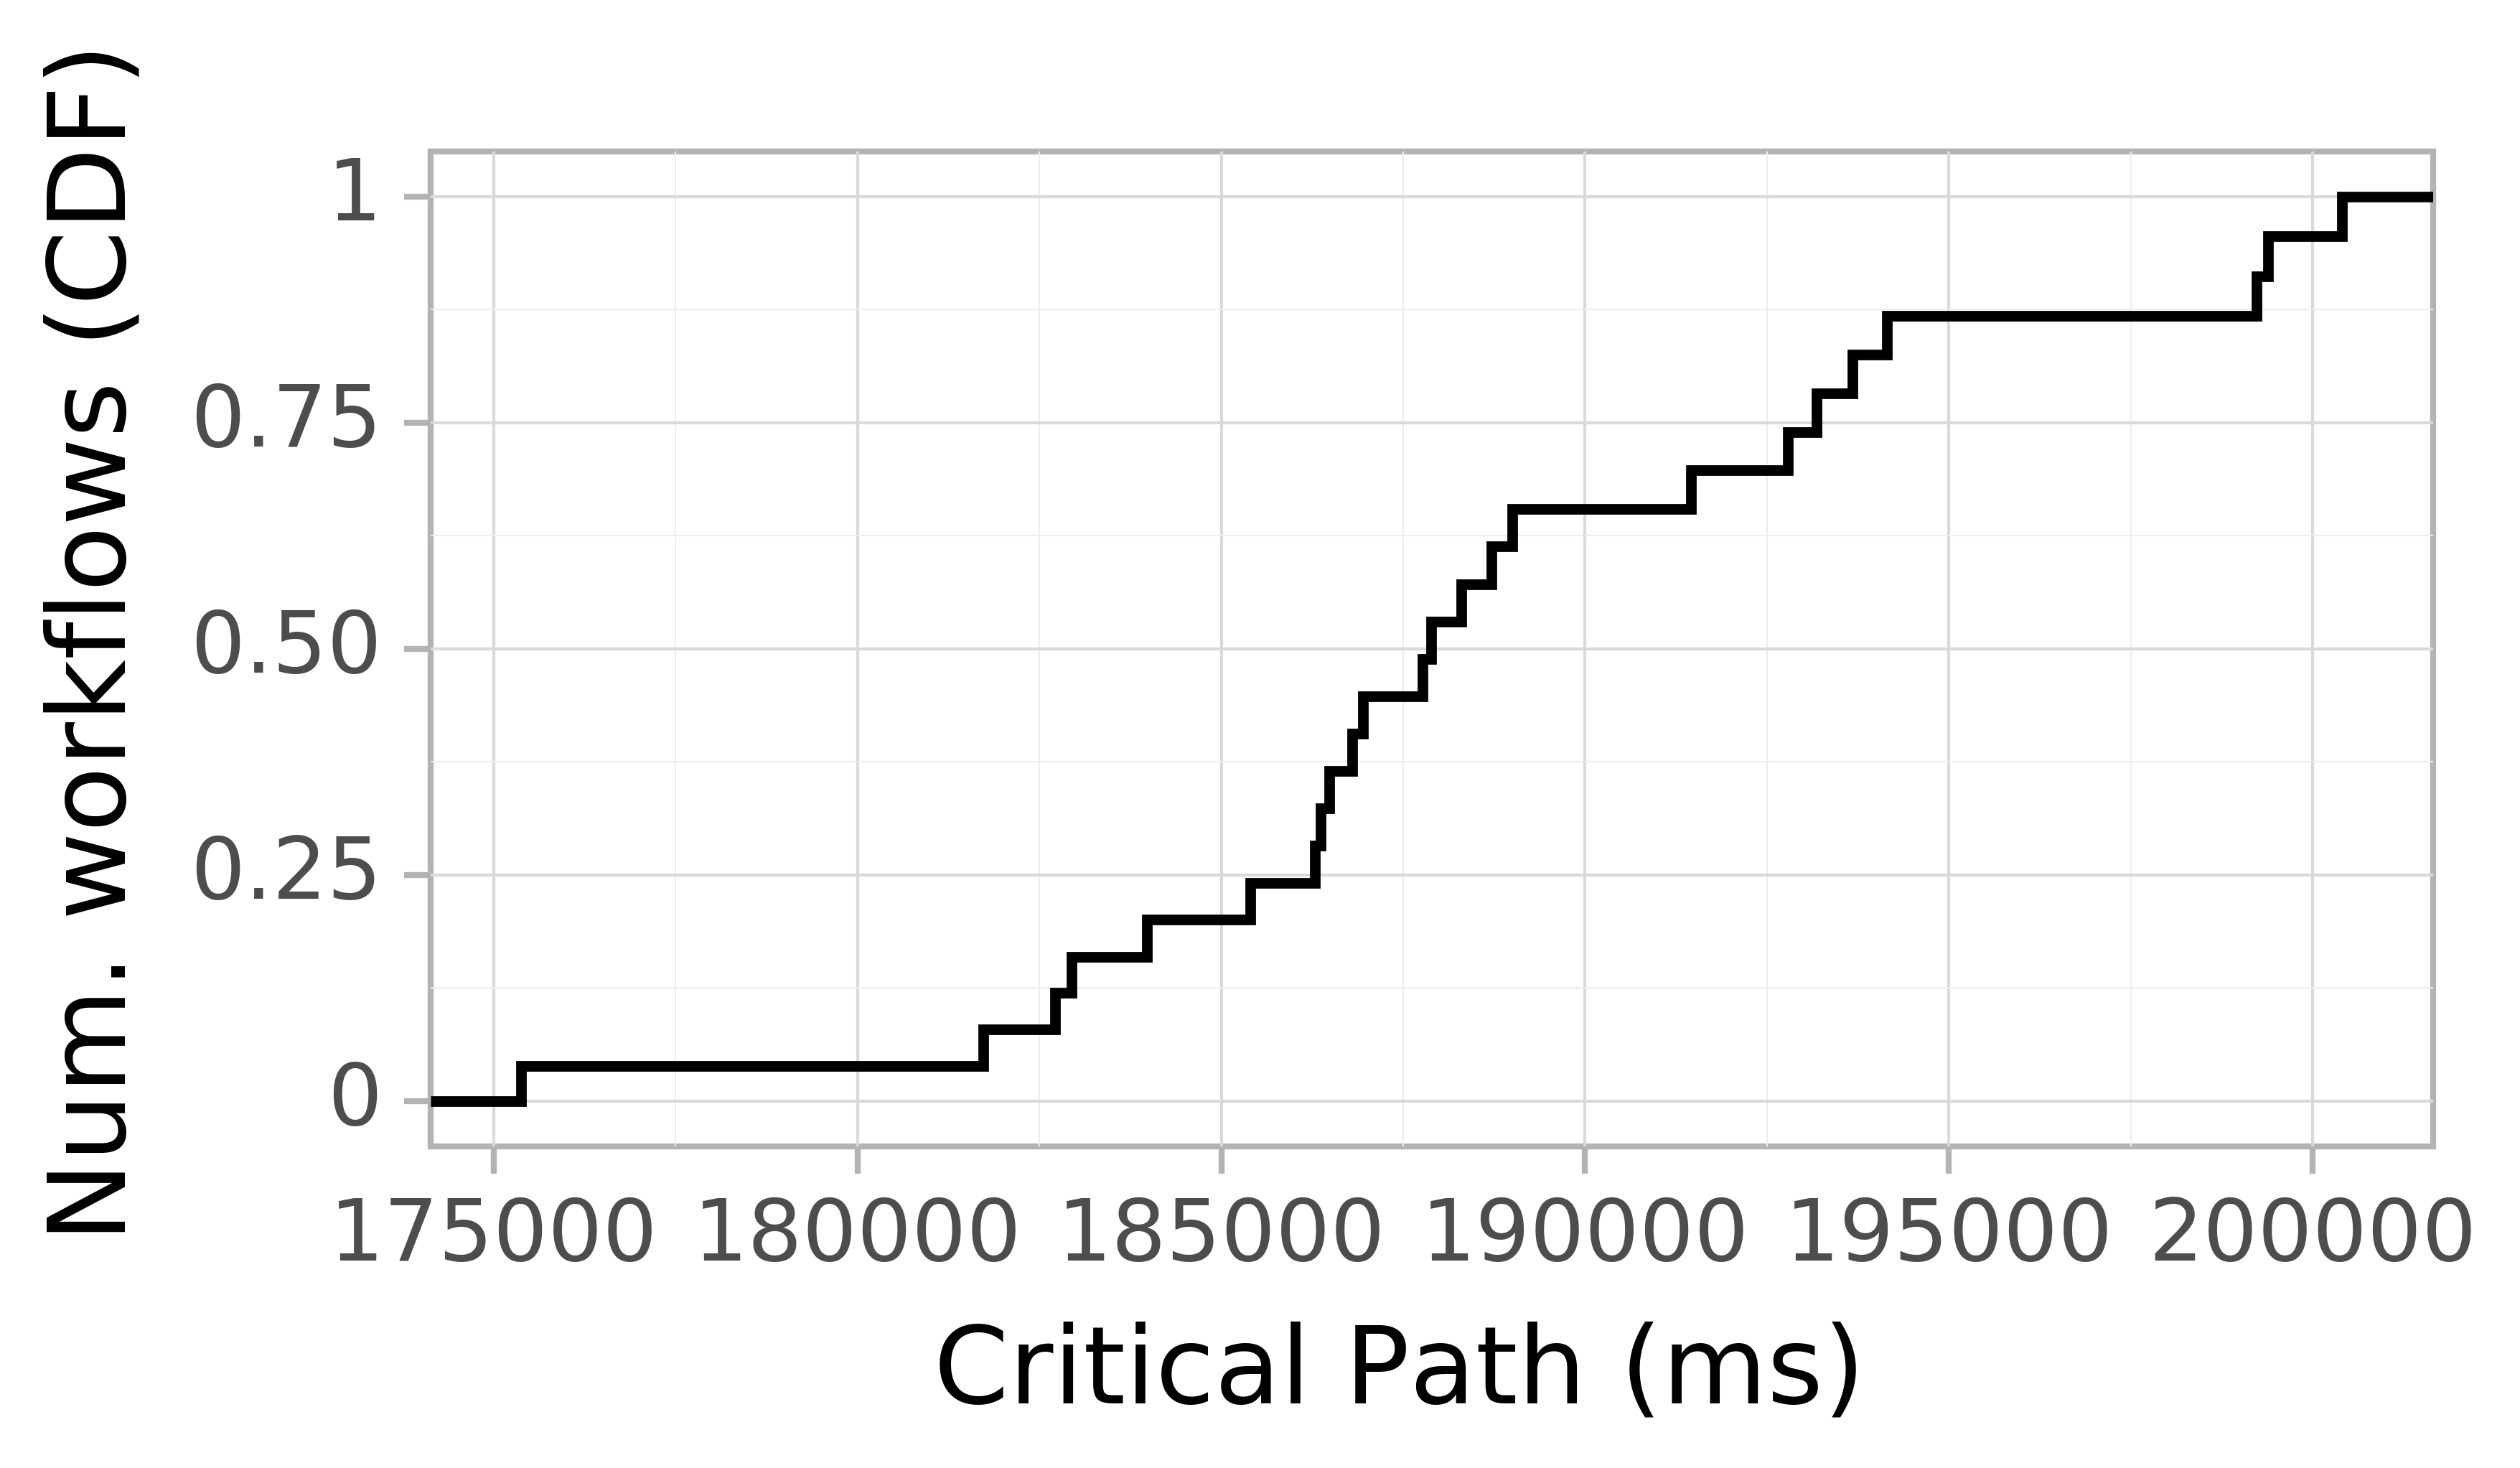 Job runtime CDF graph for the askalon-new_ee33 trace.